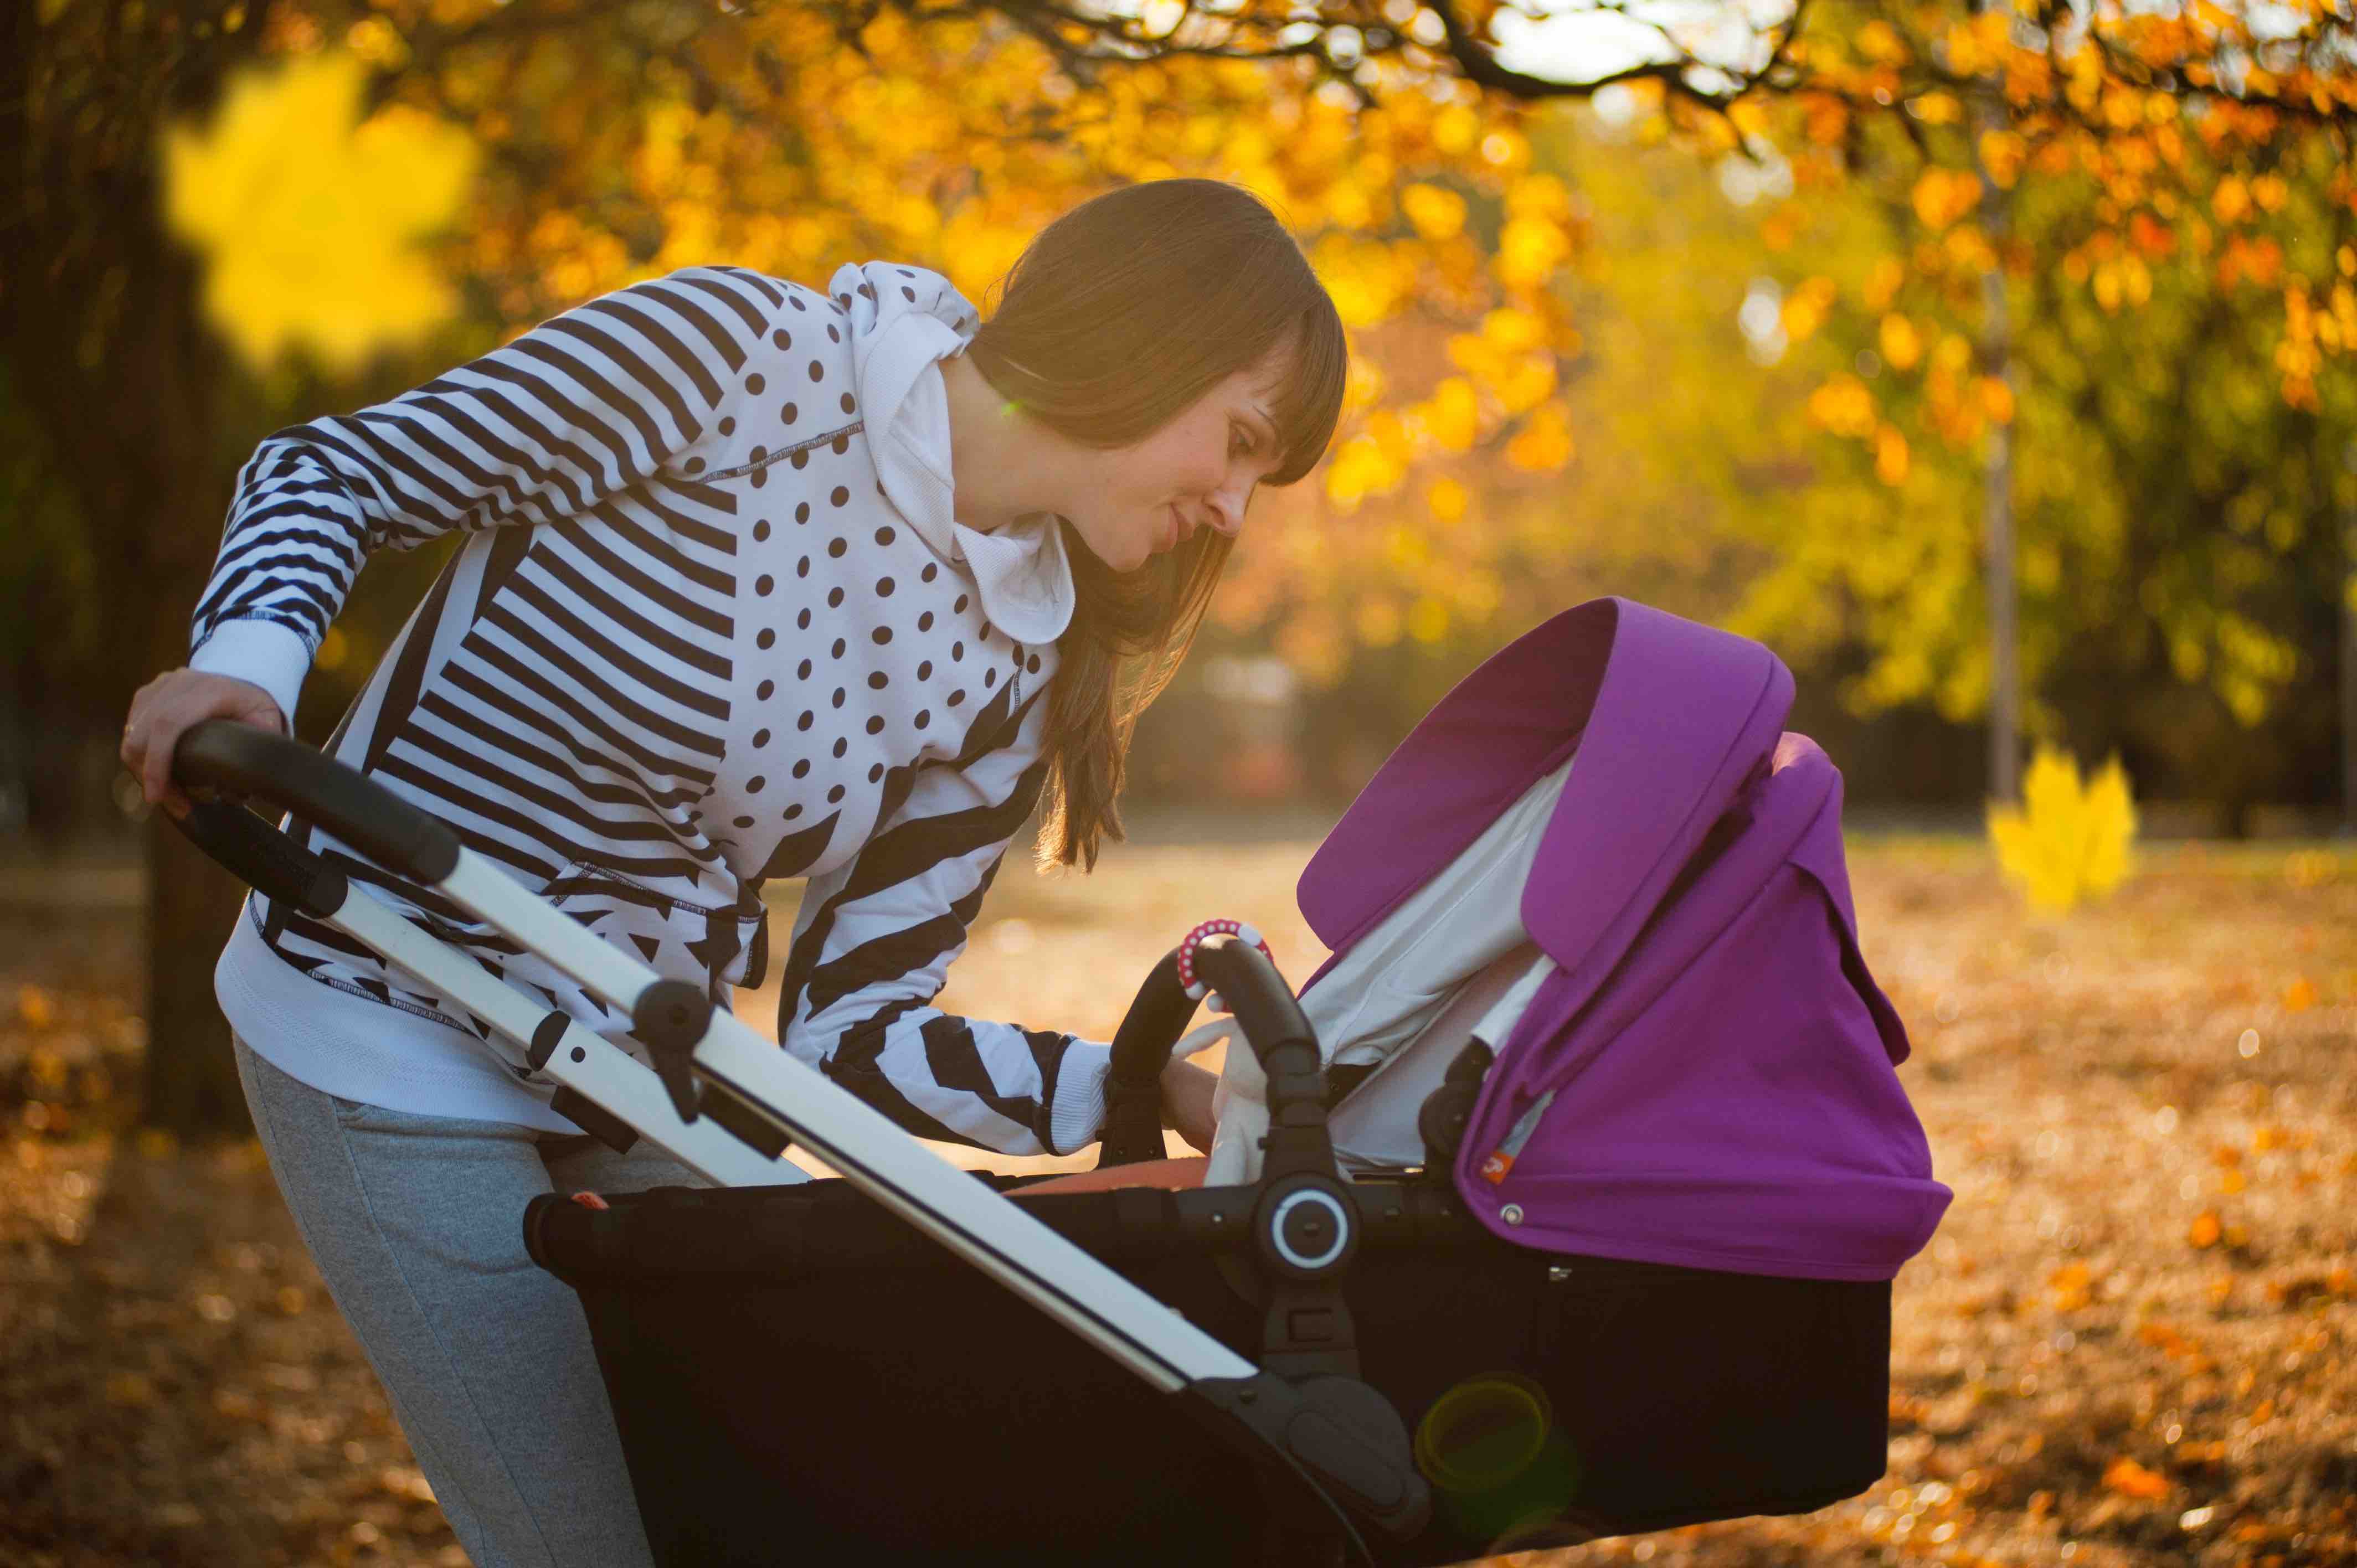 buying guide and recommendation for buying stroller or pram for your baby